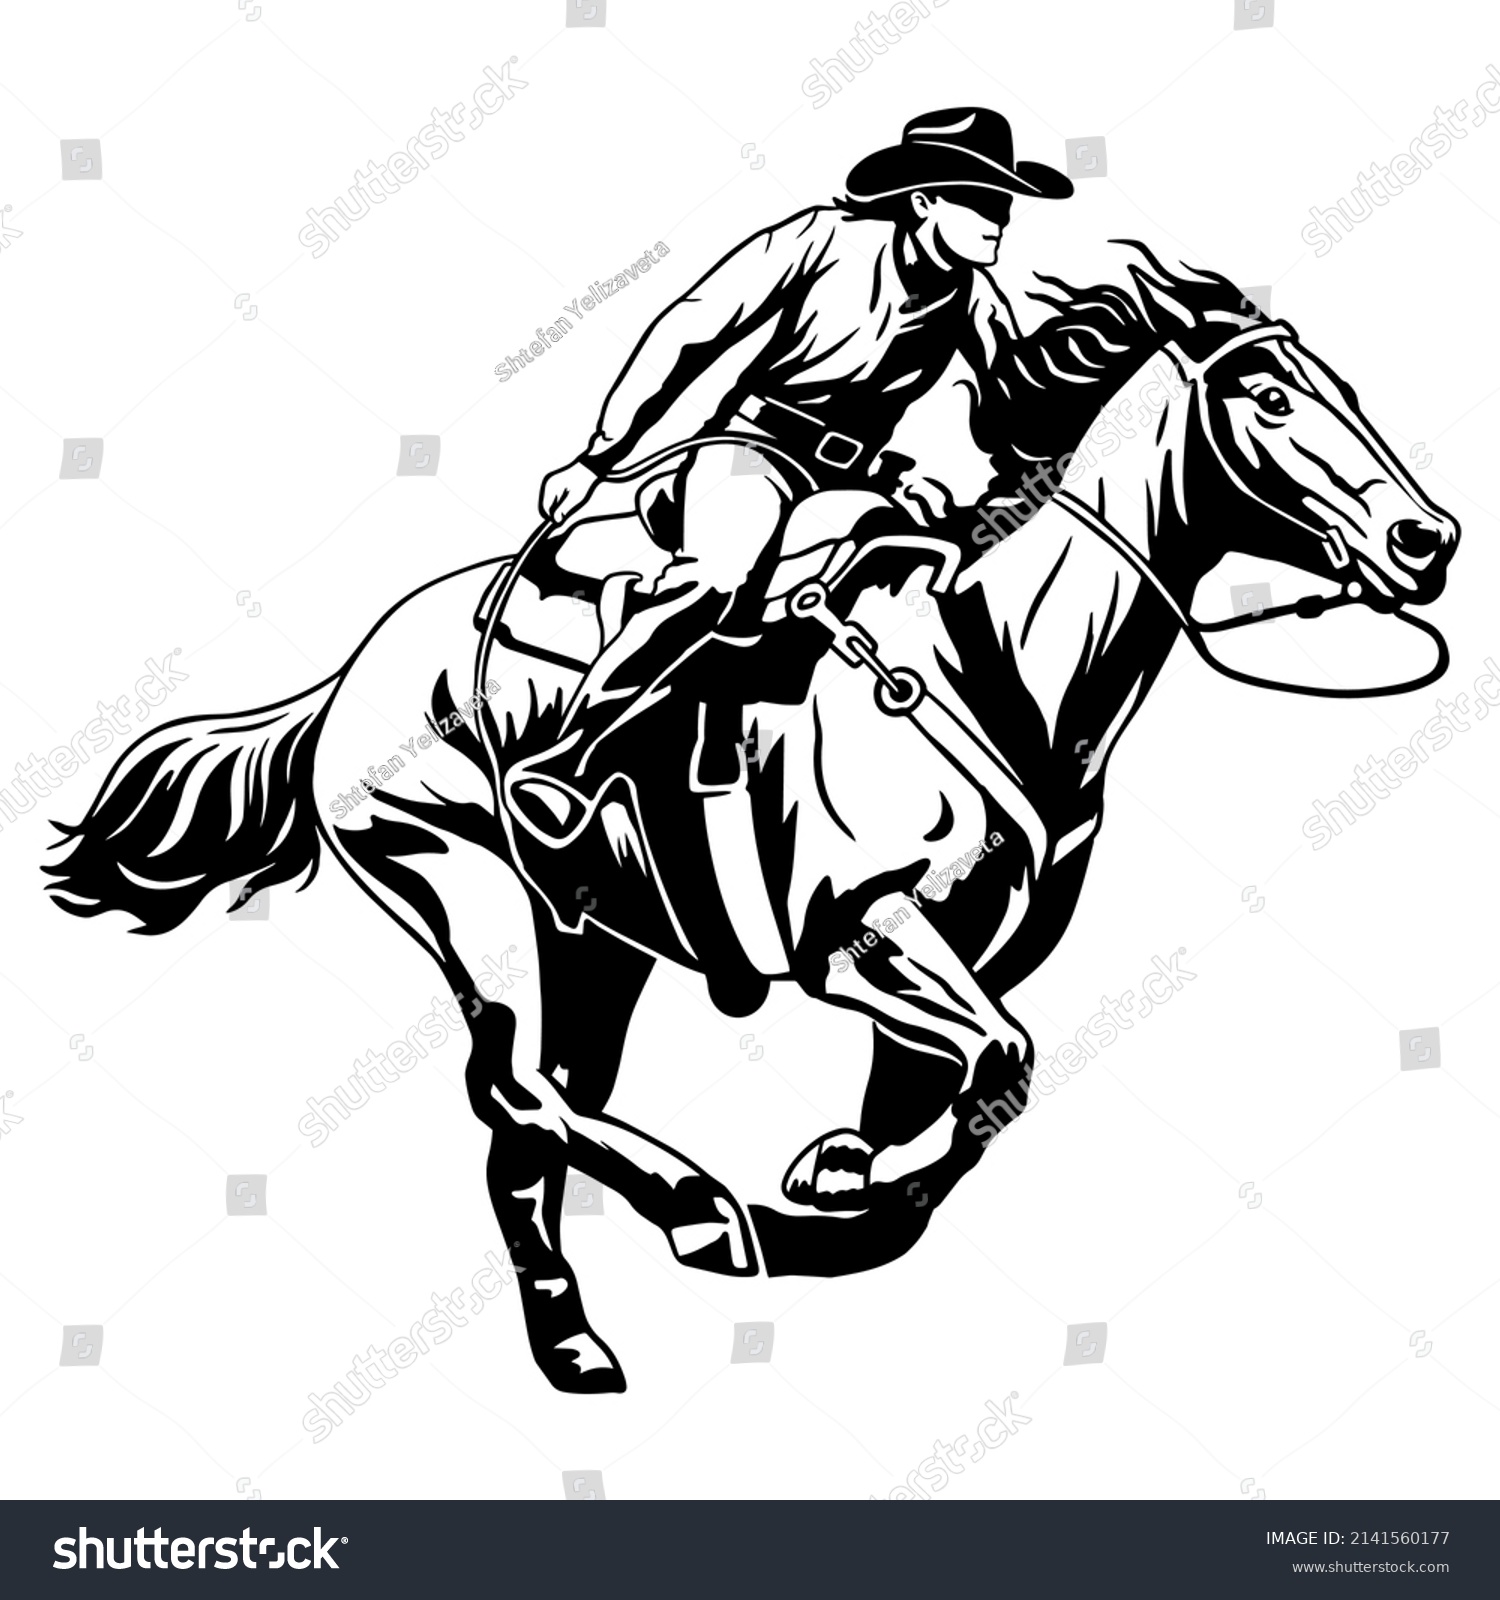 SVG of Cowboy in a hat riding a horse. Vector illustration for printing and cutting vinyl svg